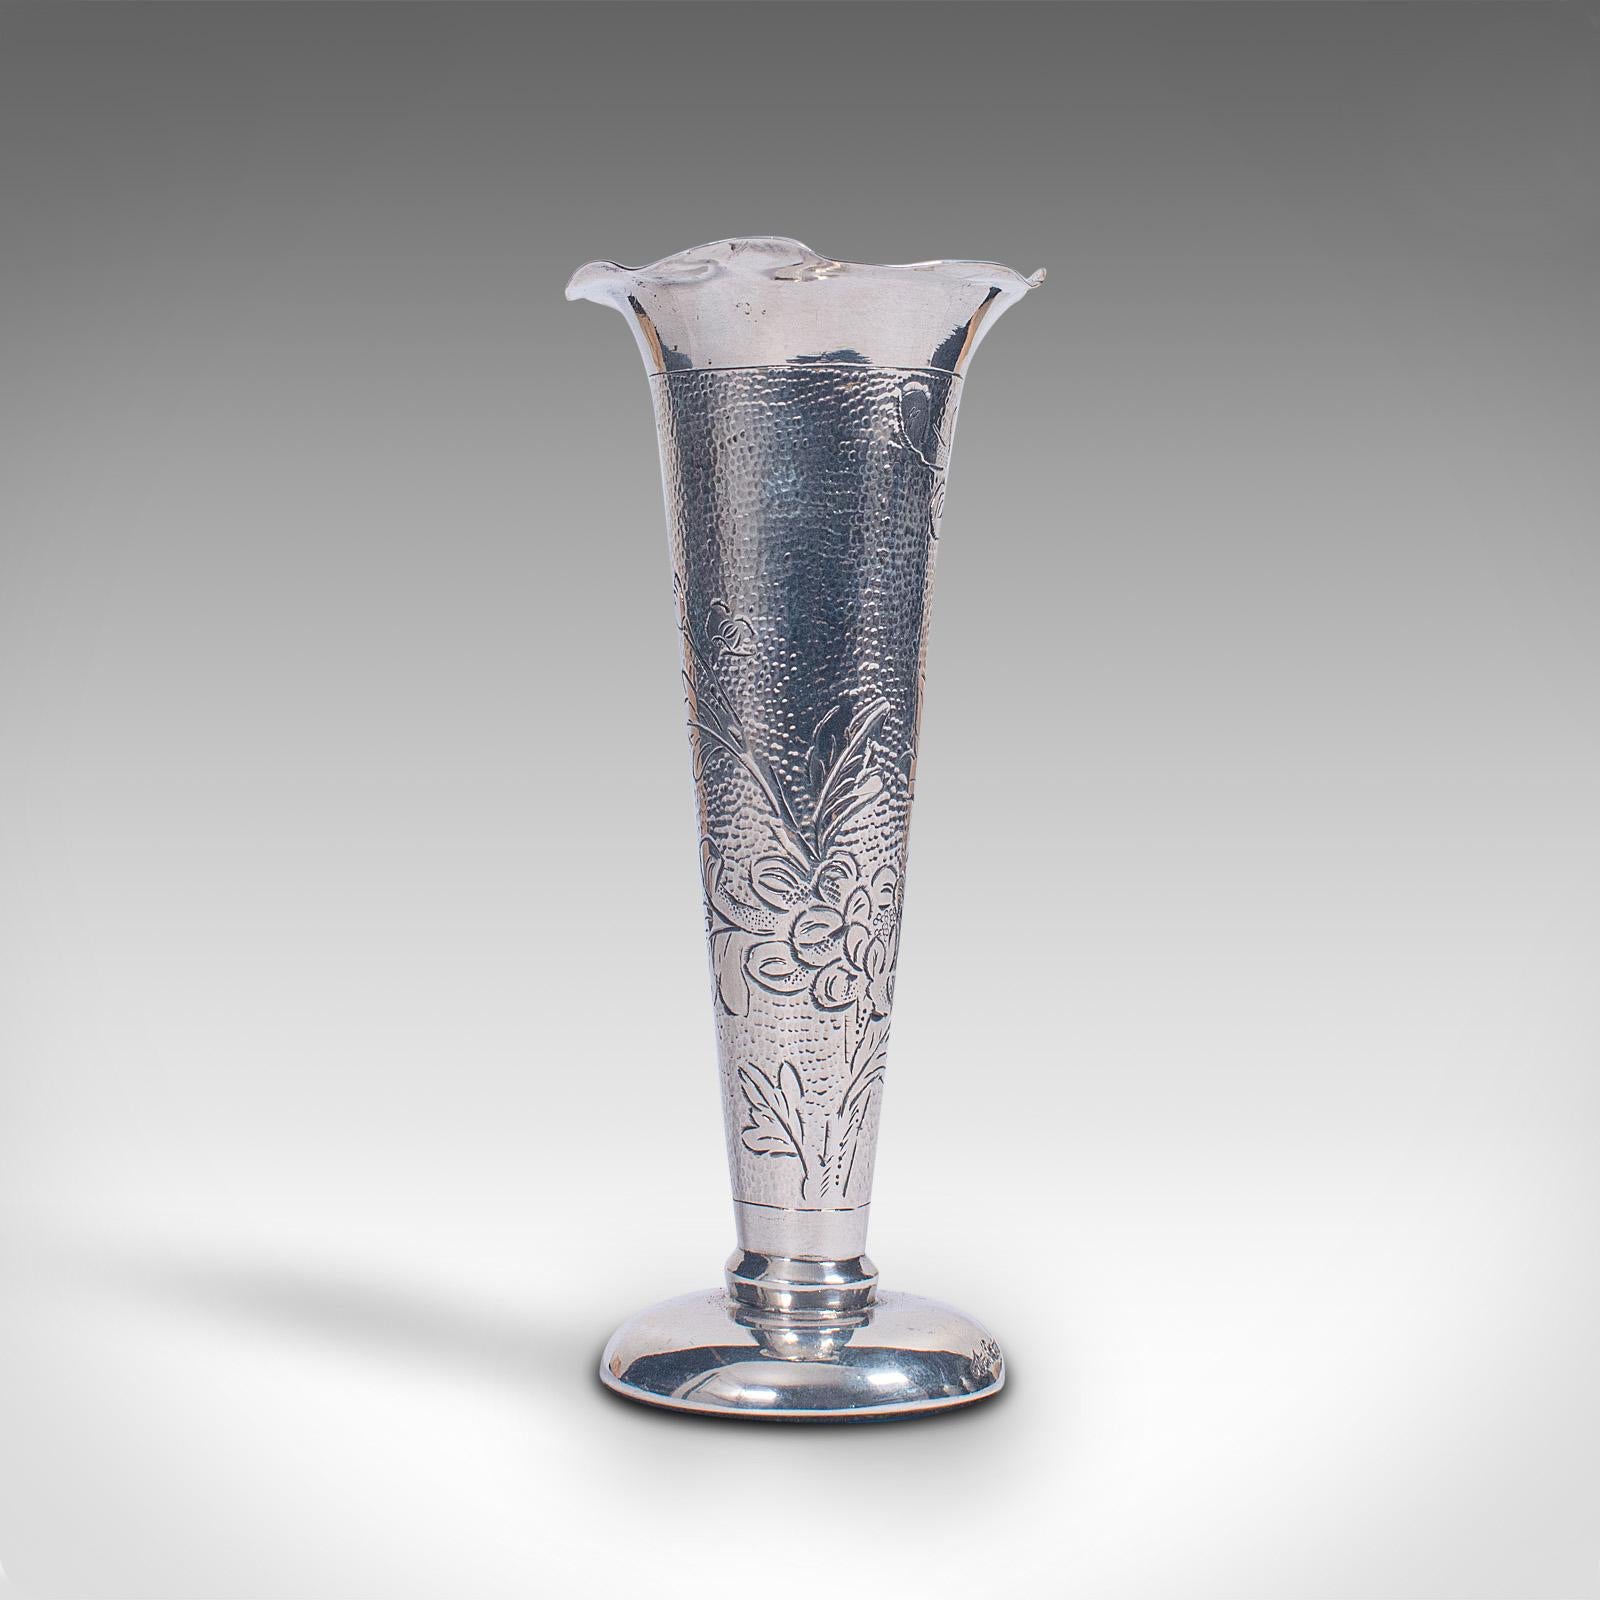 This is a small vintage single stem vase. A Chinese, sterling silver decorative posy flute, dating to the mid 20th century, circa 1960.

Charmingly compact stem vase with appealing detail
Displays a desirable aged patina and in good